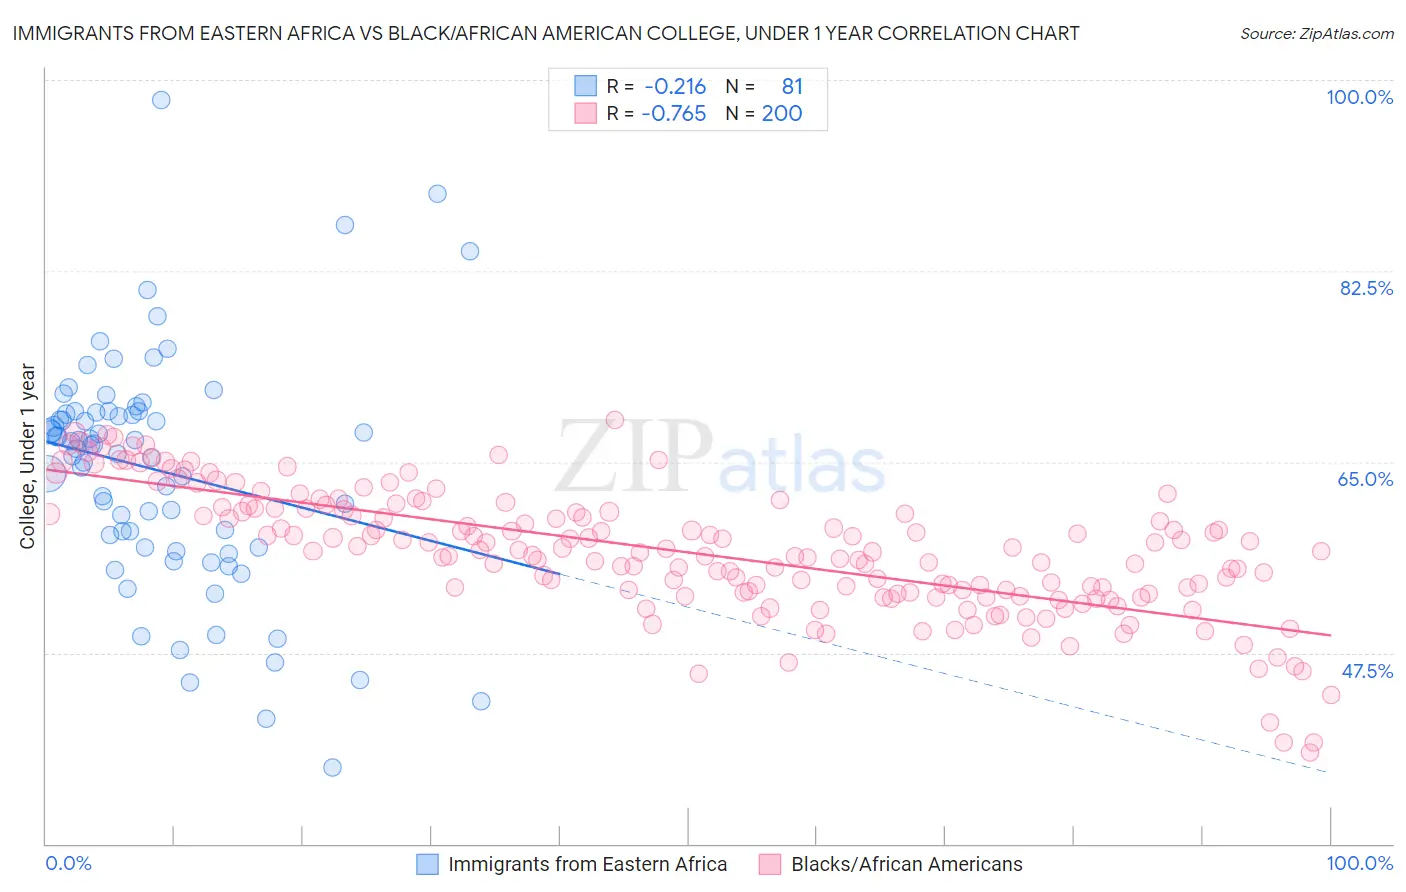 Immigrants from Eastern Africa vs Black/African American College, Under 1 year